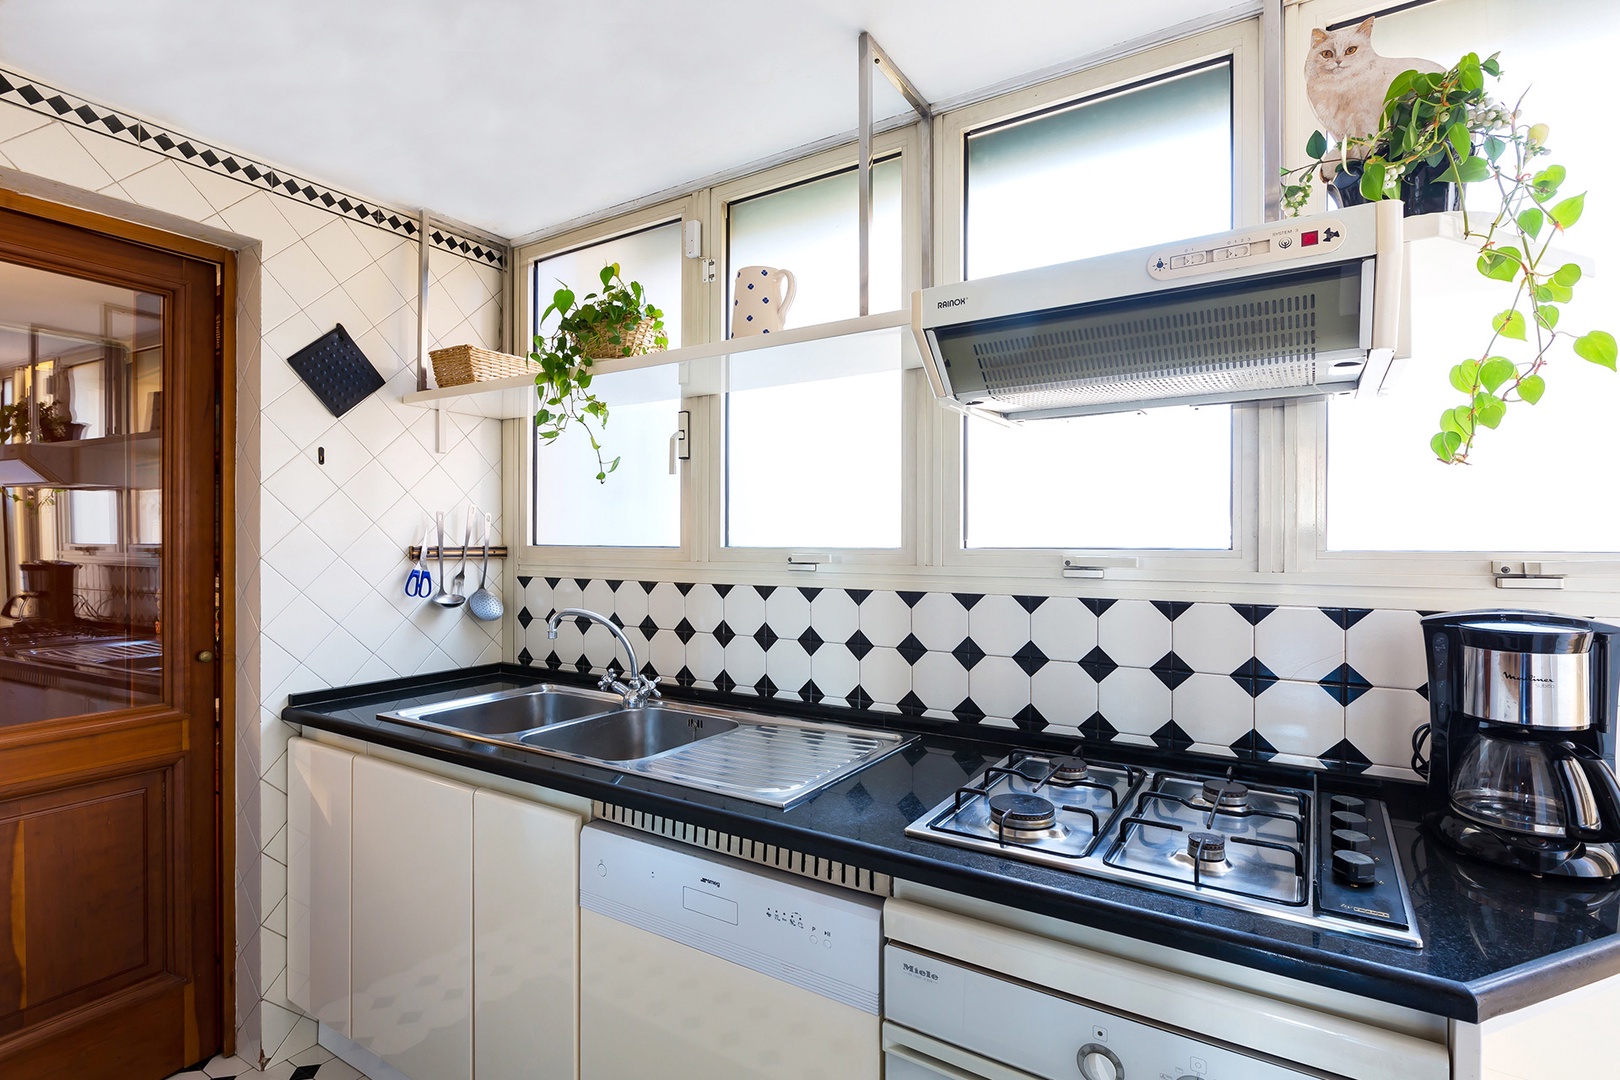 Kitchen is bright and will appointed. It is compact, typical for Italian homes.